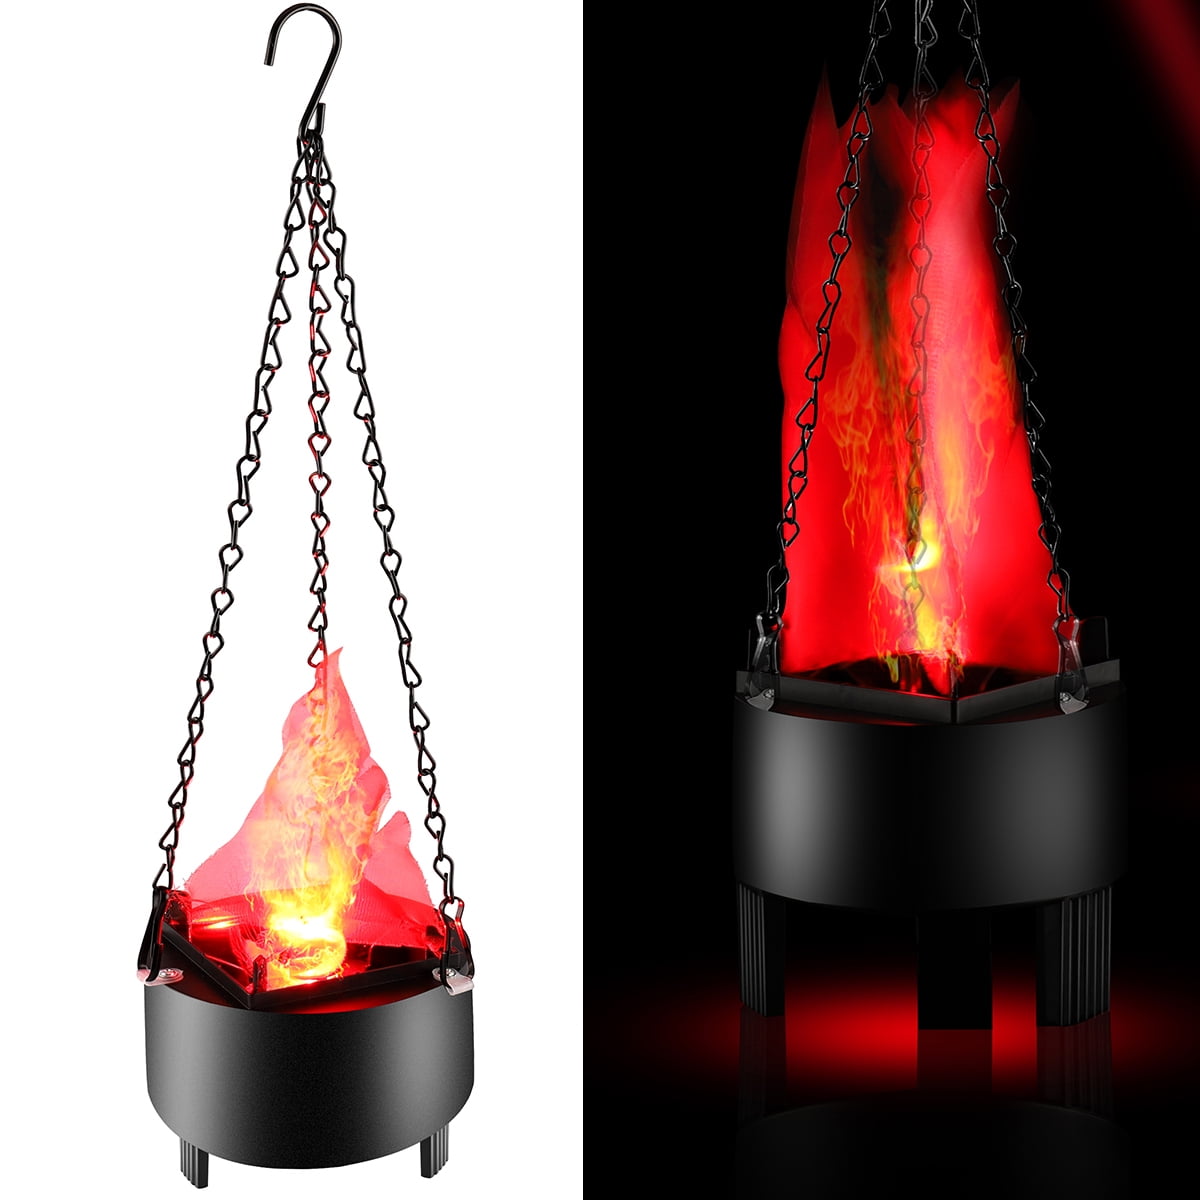 Hanging Lamp-Large Flame Light Electronic Brazier Lamp LED 3D Flickering Fake Fire Simulation Flame Effect for Halloween Christmas Festival Party Stage Decor Lighting 